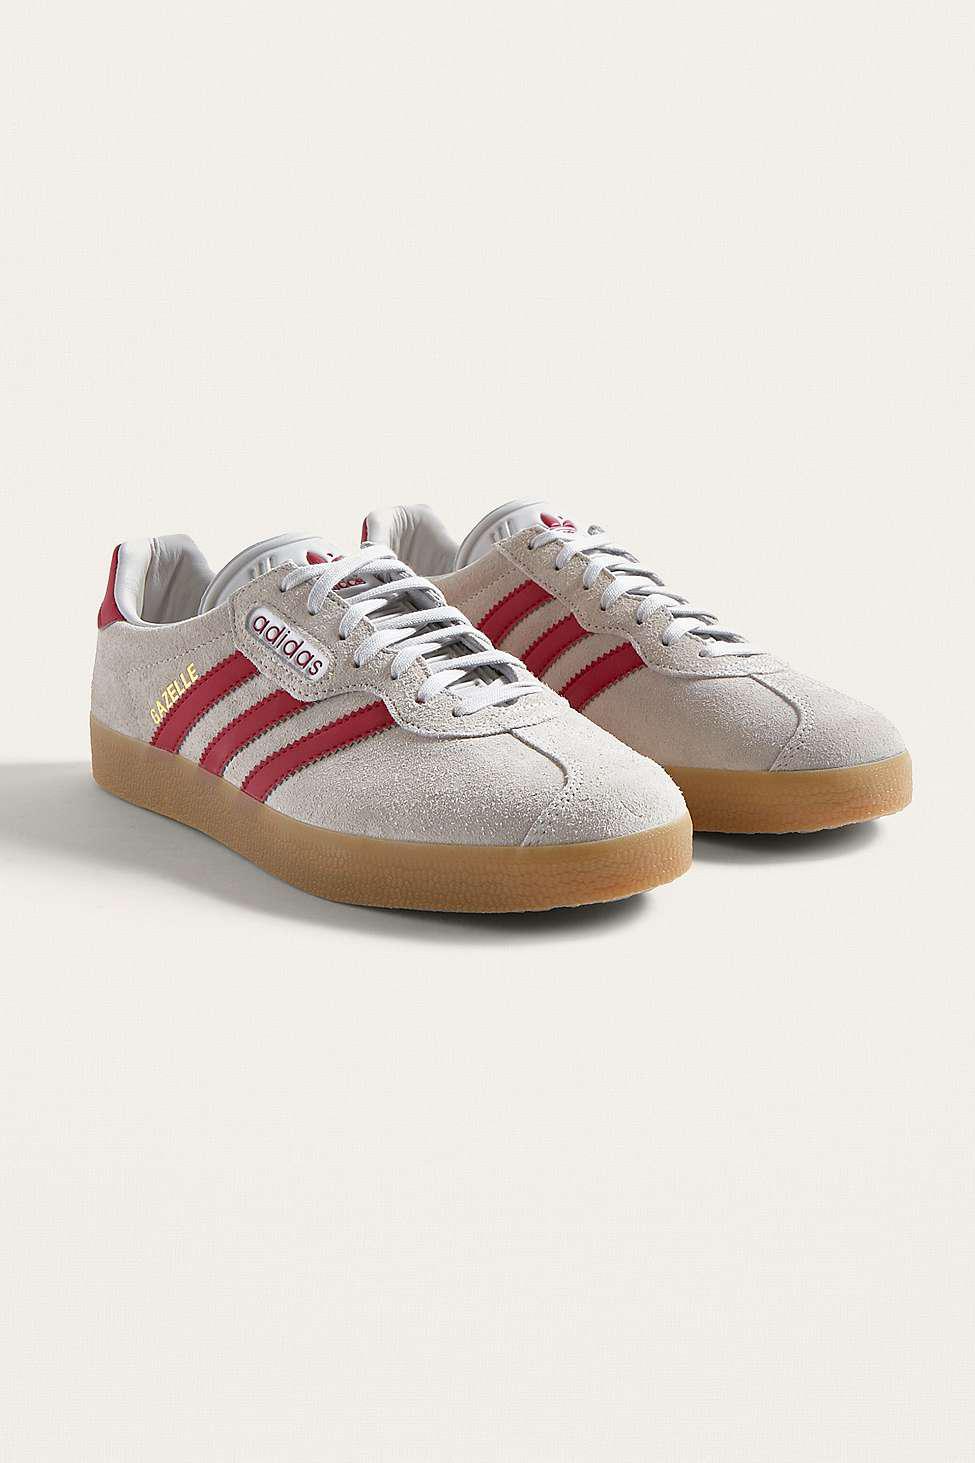 Contract Cadeau Slaapzaal adidas Gazelle Super Grey And Red Trainers in Grey for Men | Lyst UK